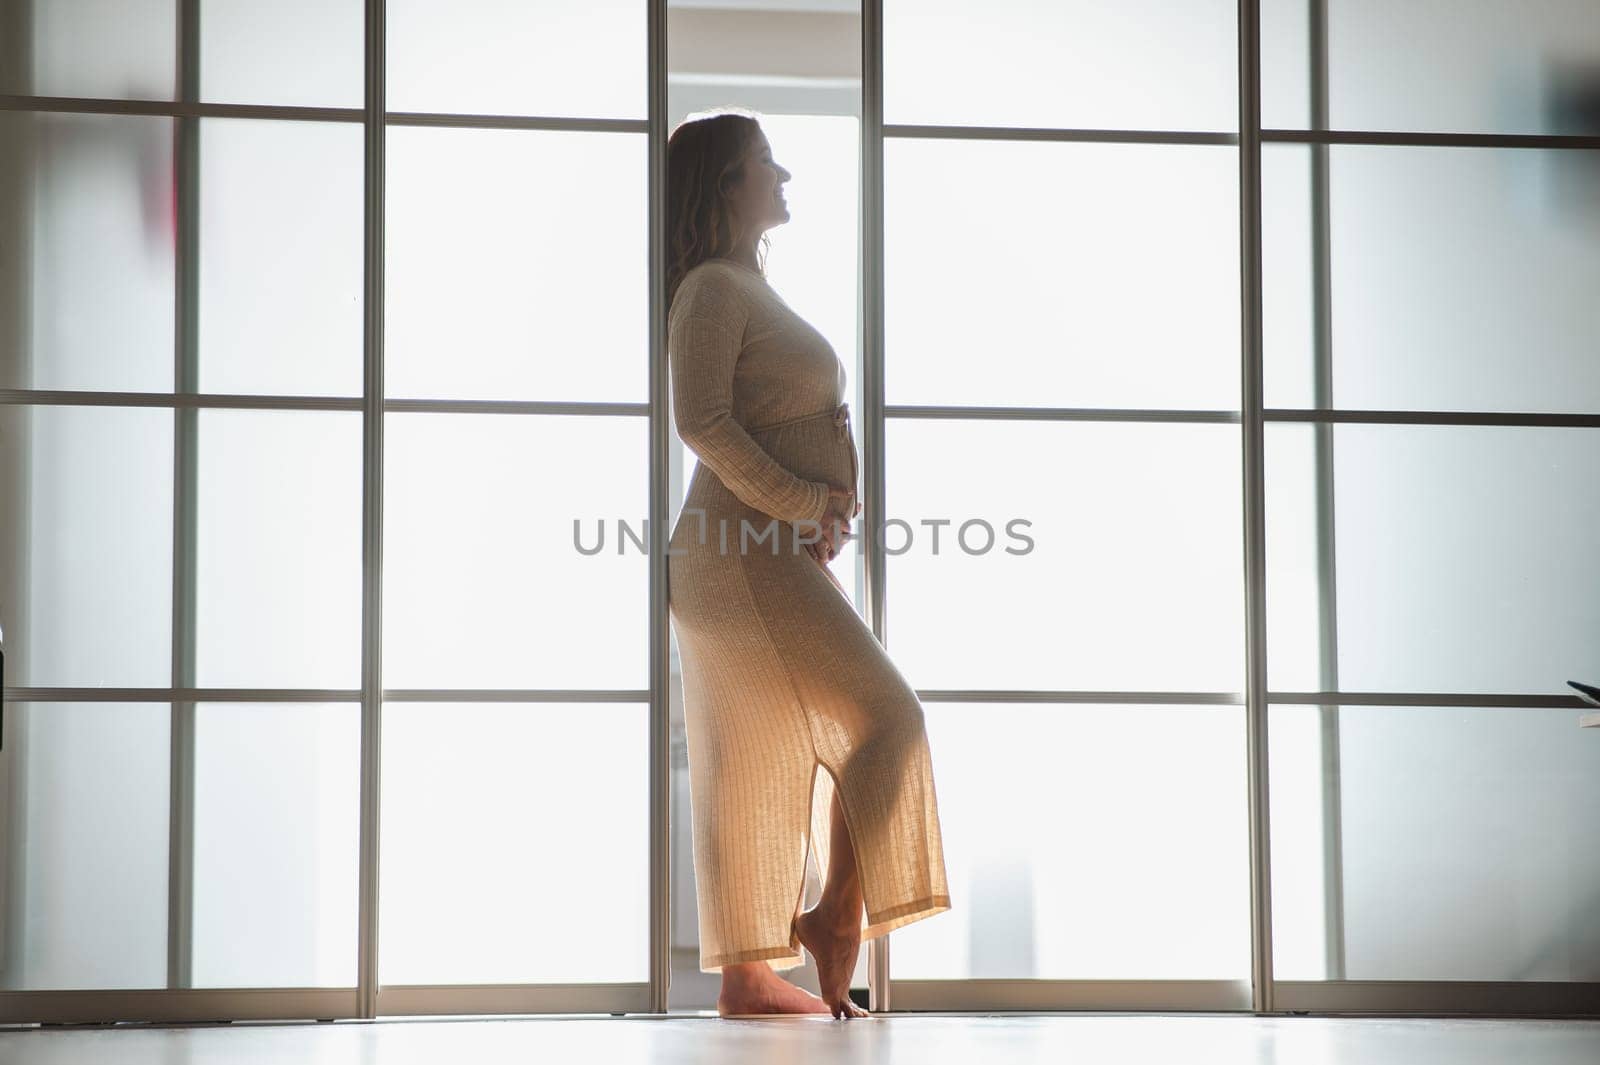 A pregnant woman in a long beige dress stands in profile between the folding doors